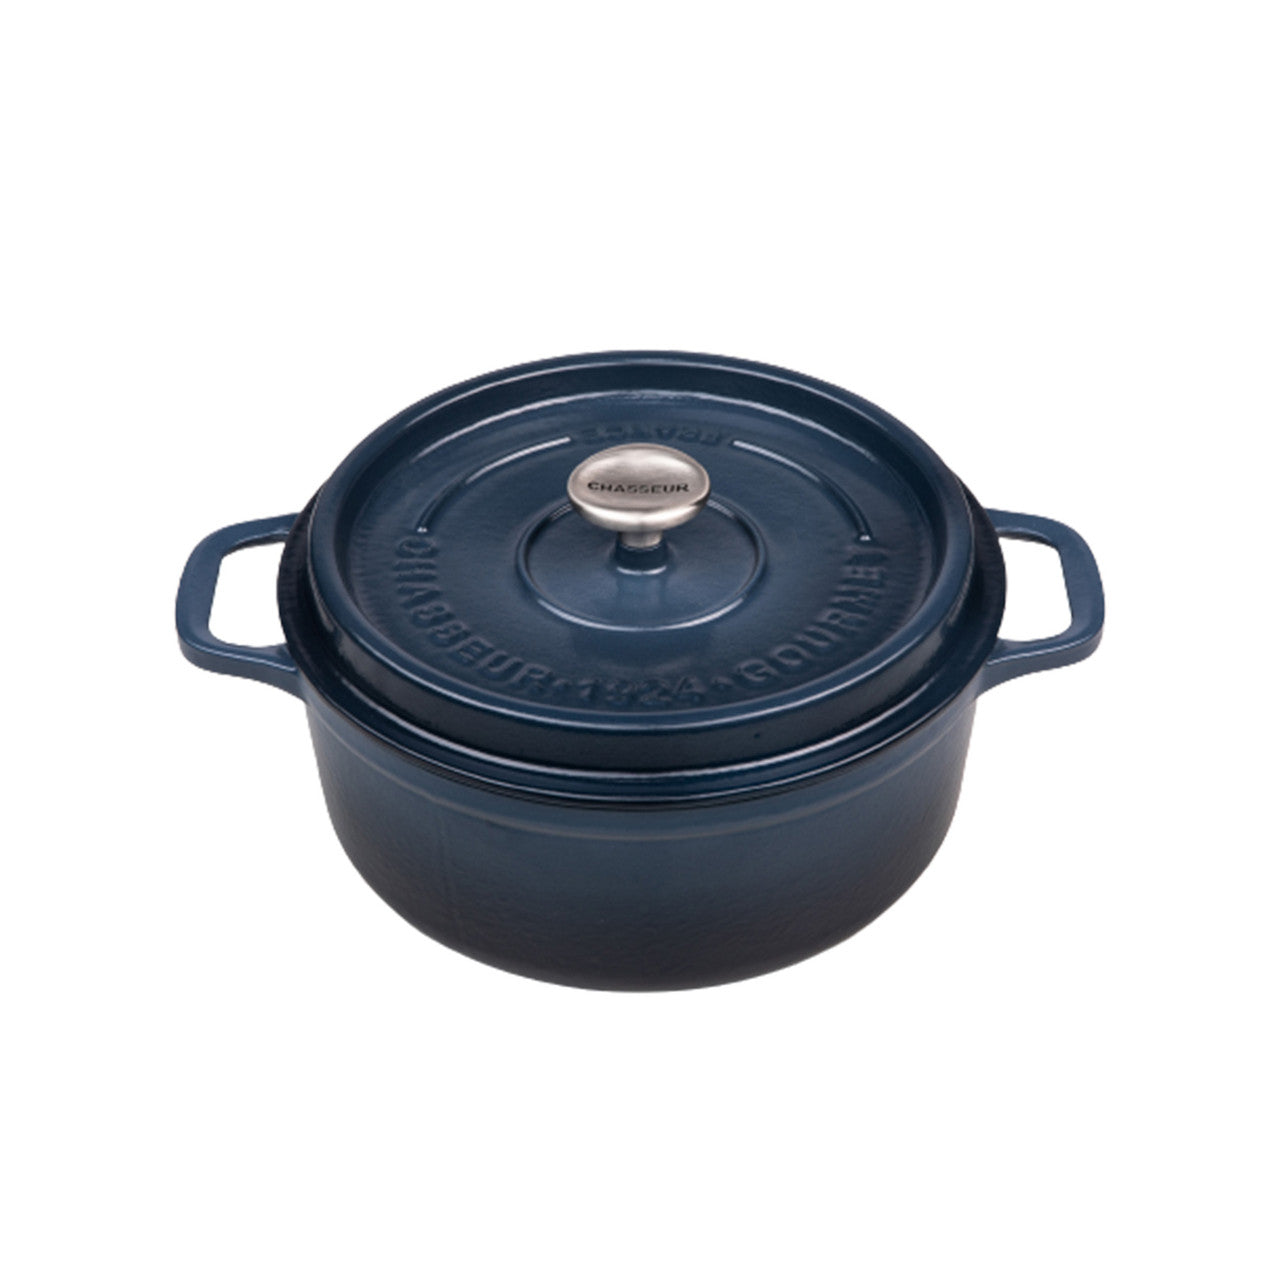 Chasseur Gourmet Round French Oven 26cm 5L Midnight Blue